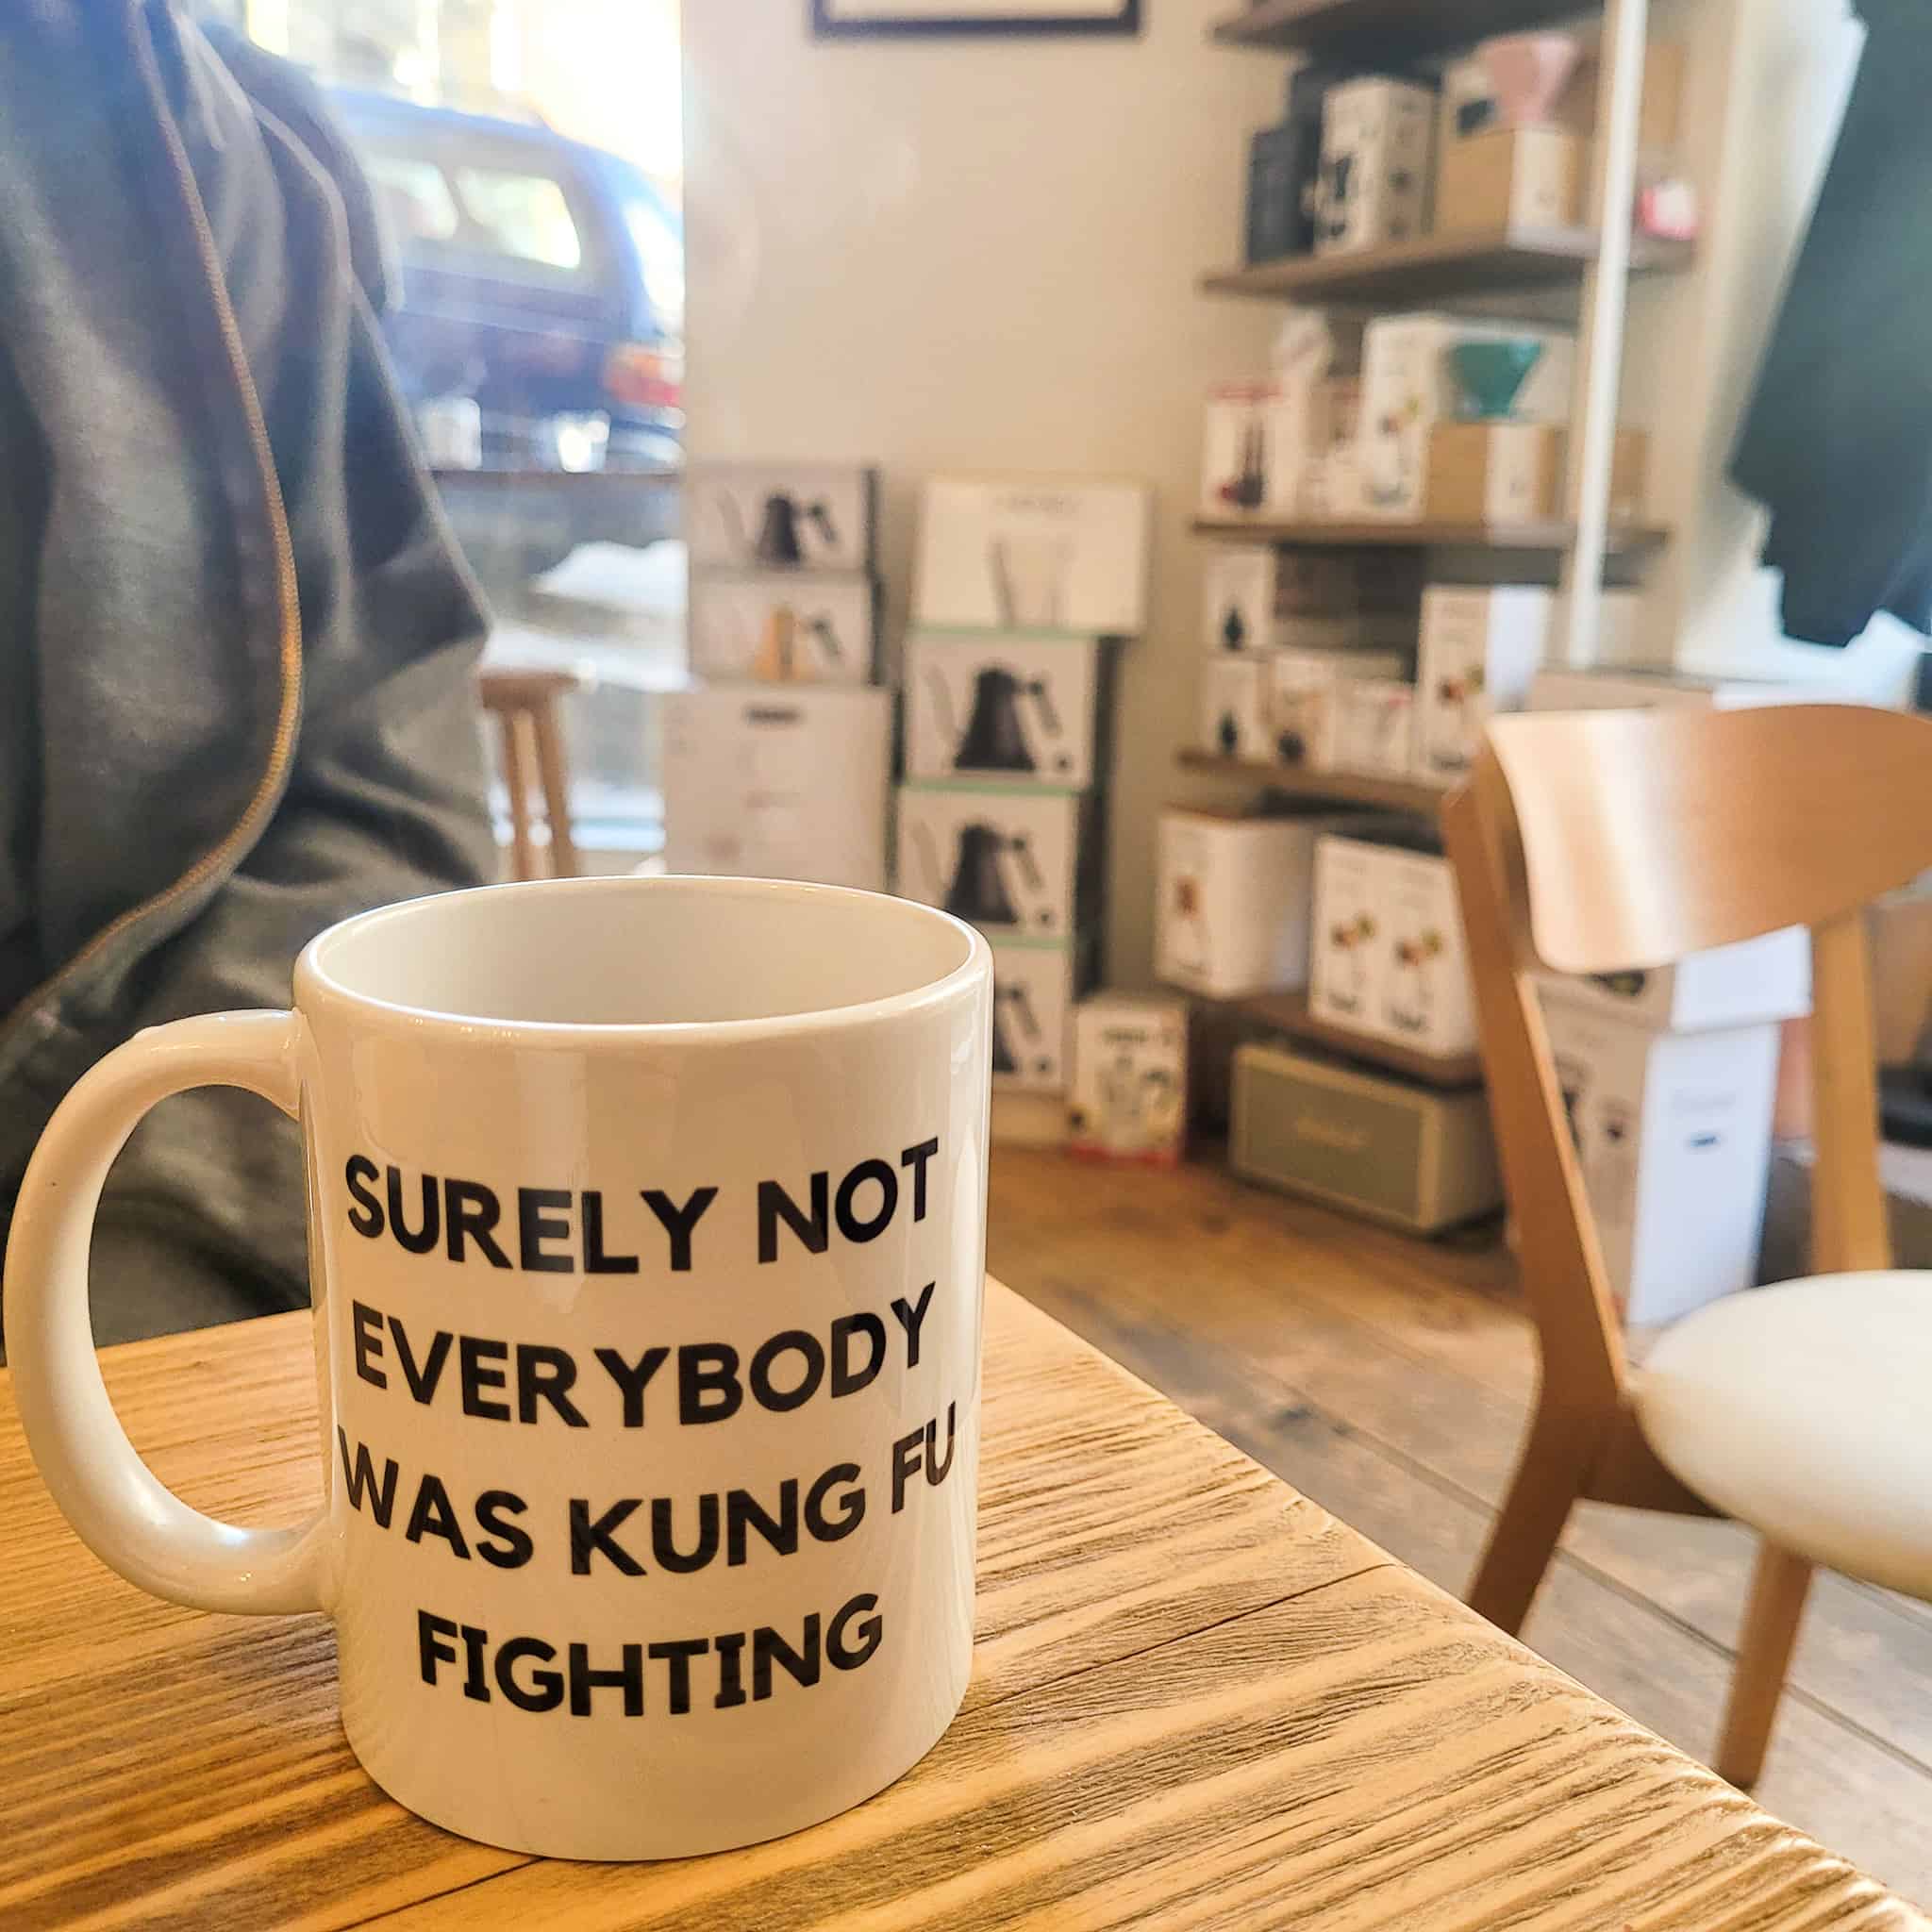 A cup that says "Surely not everybody was Kung Fu fighting"